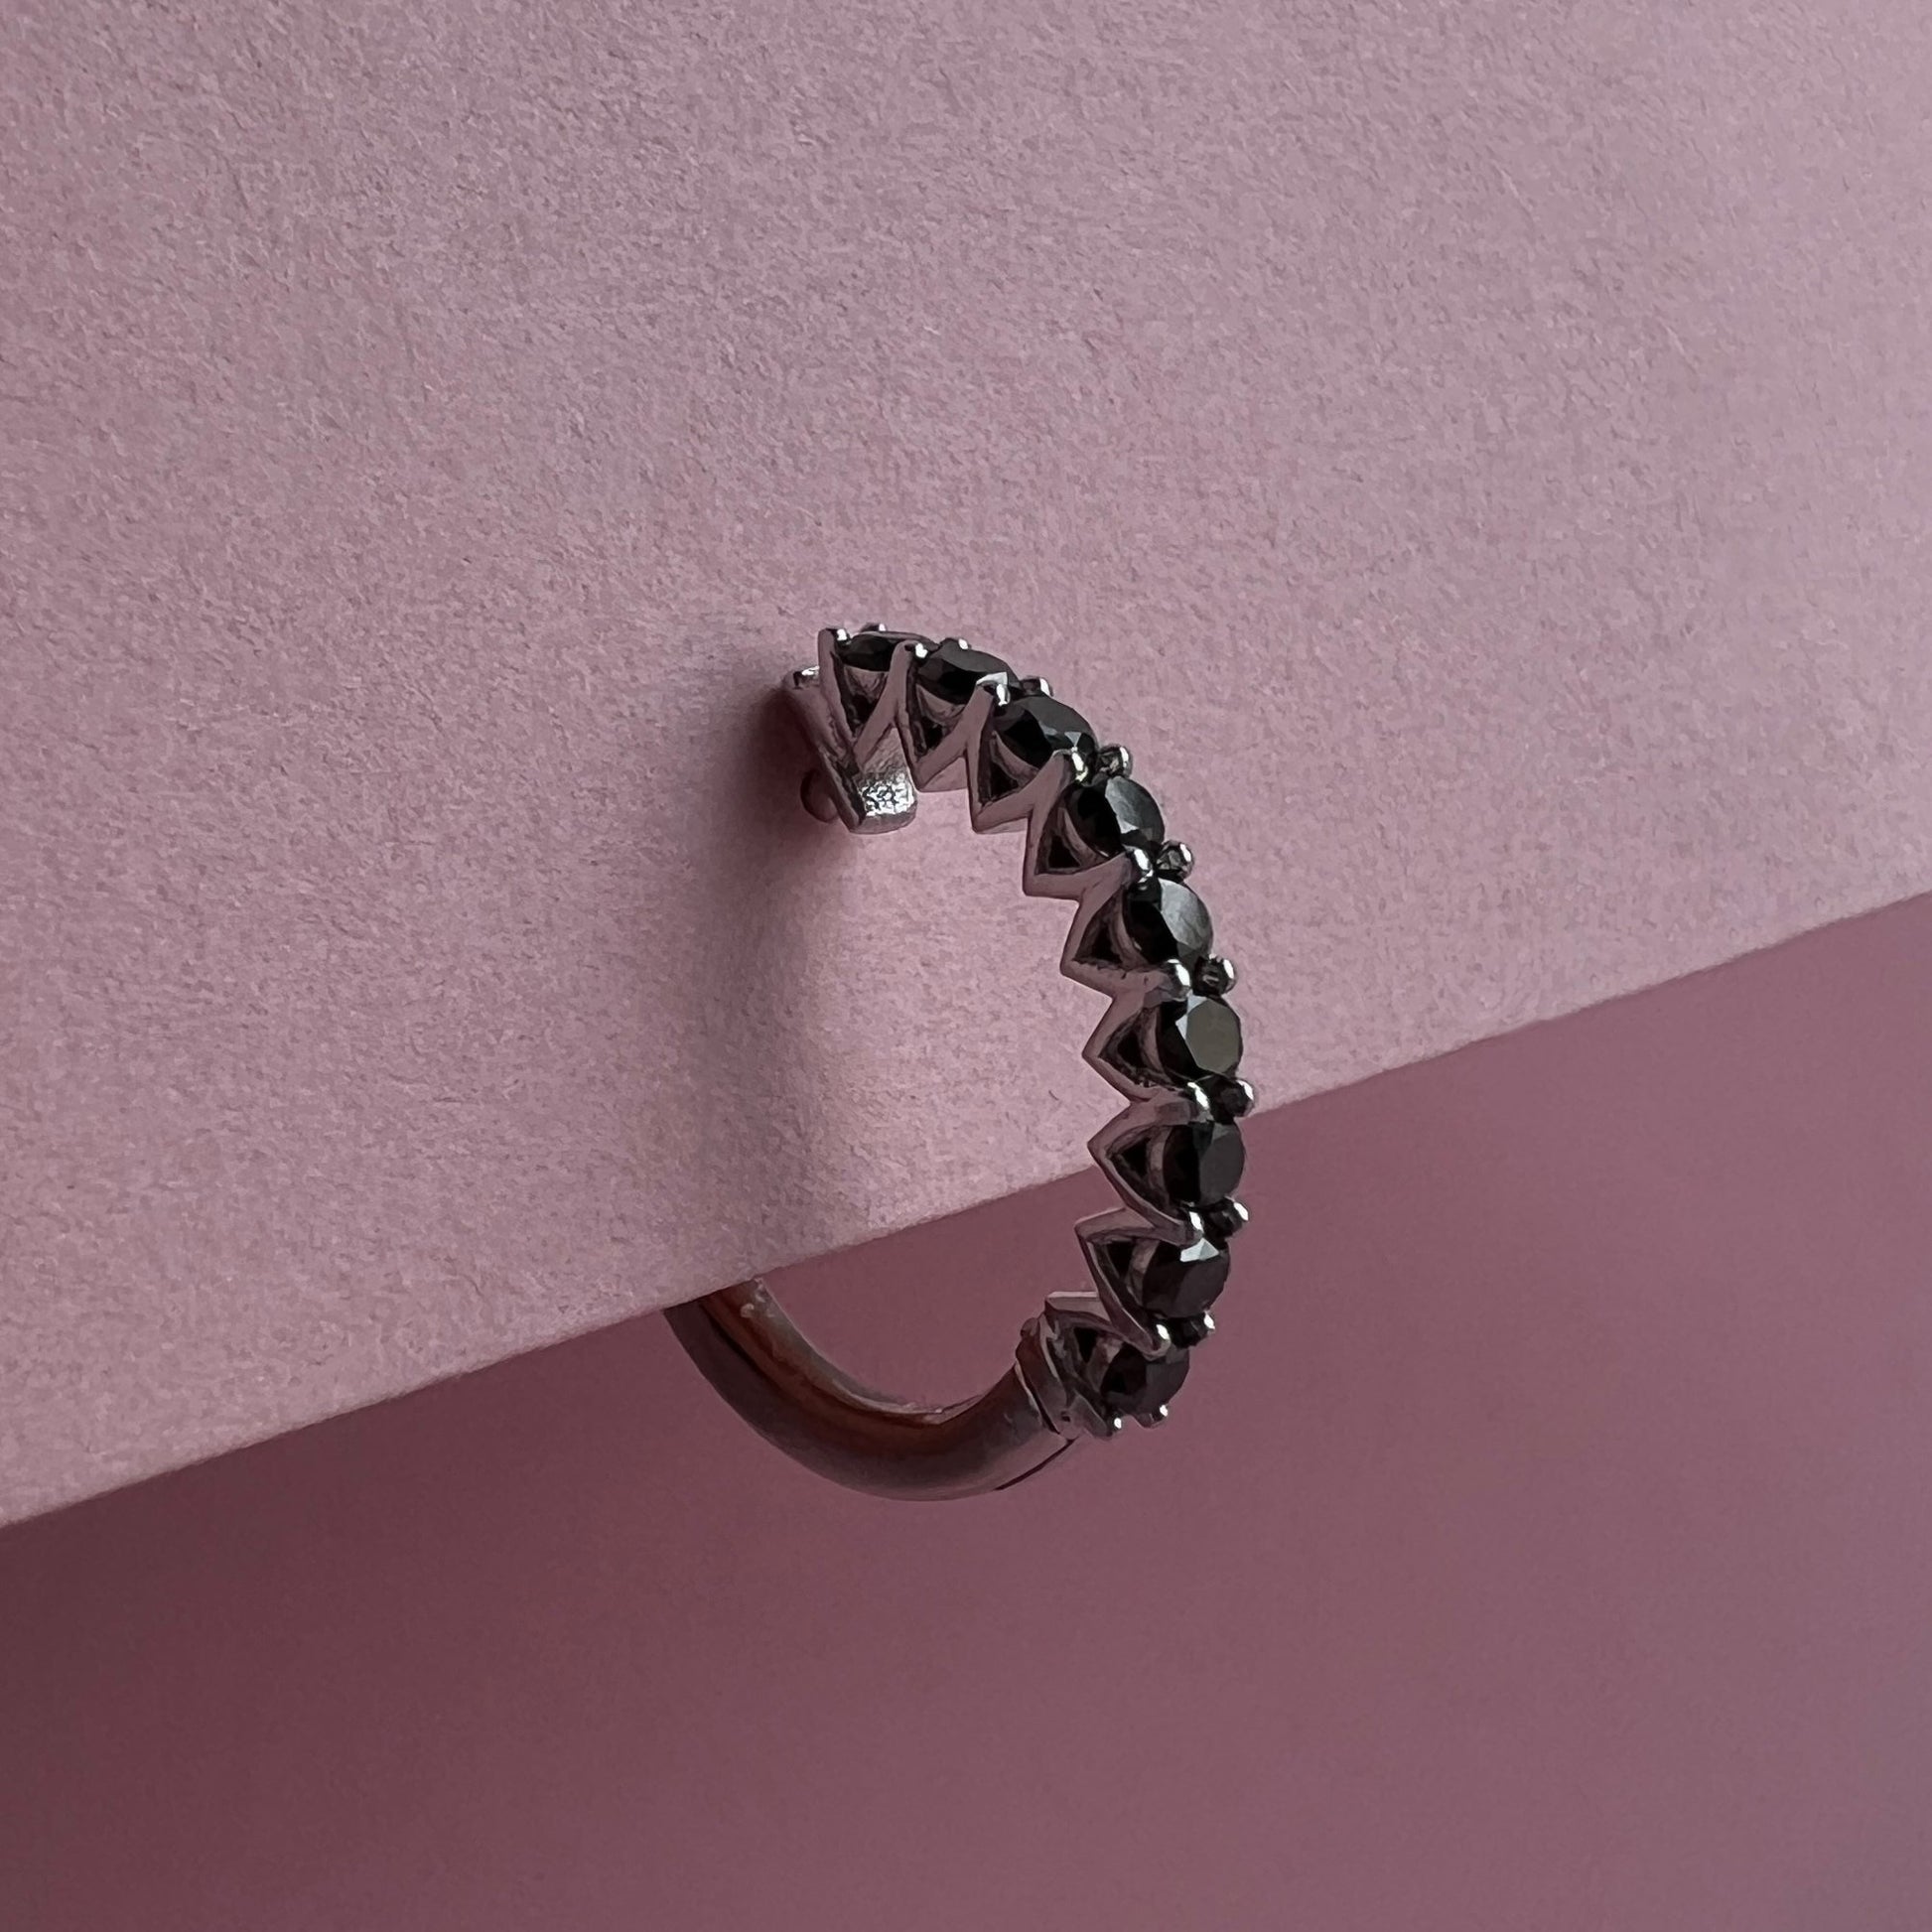 HOOP EARRING "ARCHES" WITH BLACK DIAMONDS / SOLID GOLD